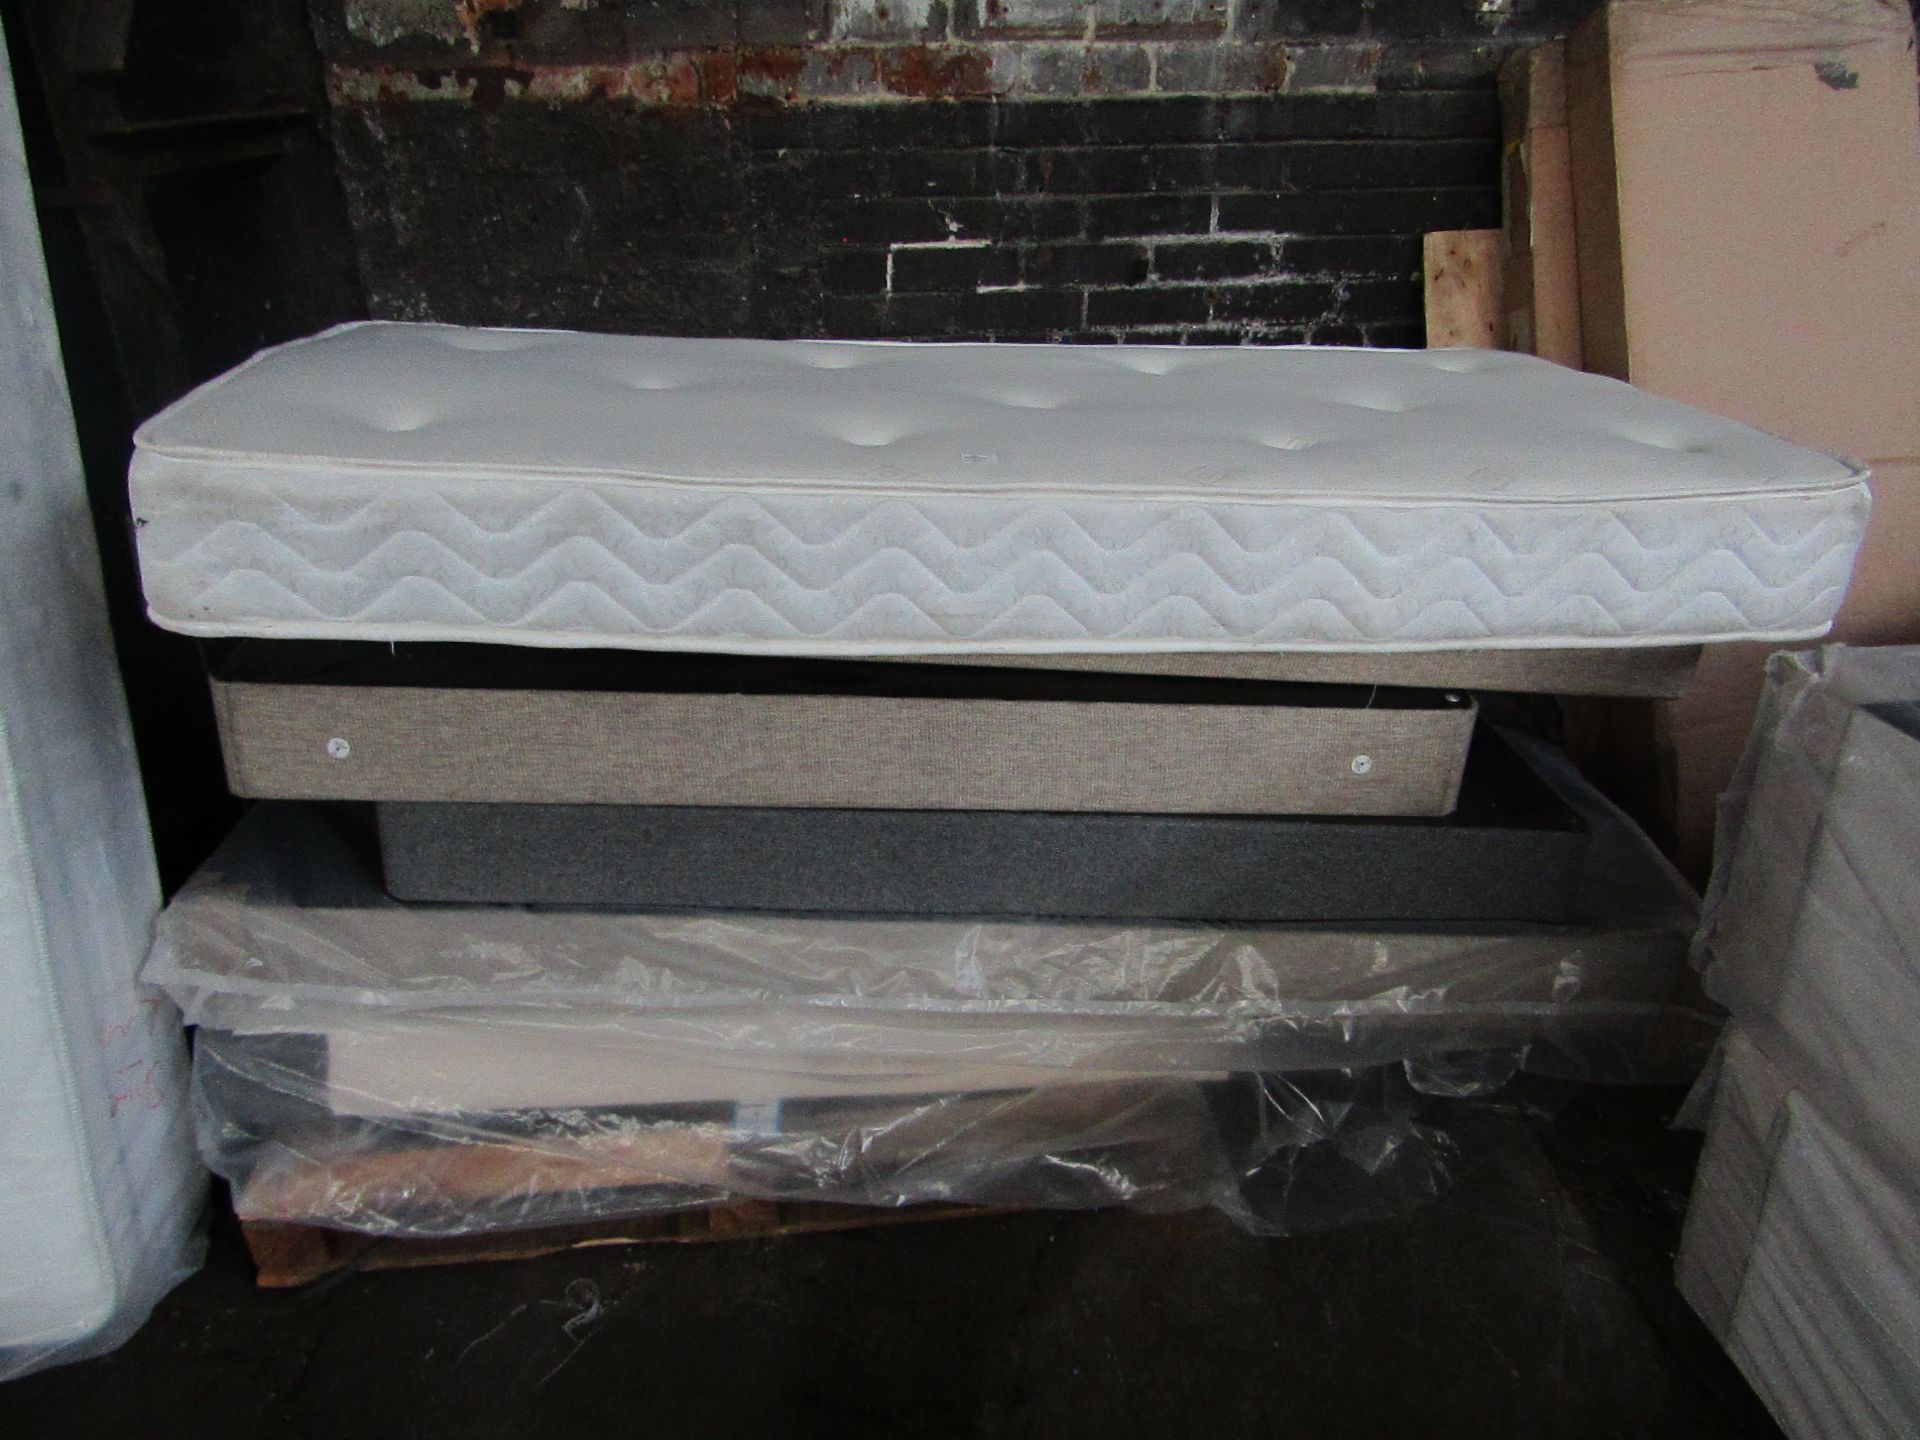 Pallet that contains 5 various Bed bases, 3 pieces seem to match and a single Cool tpouch memeory